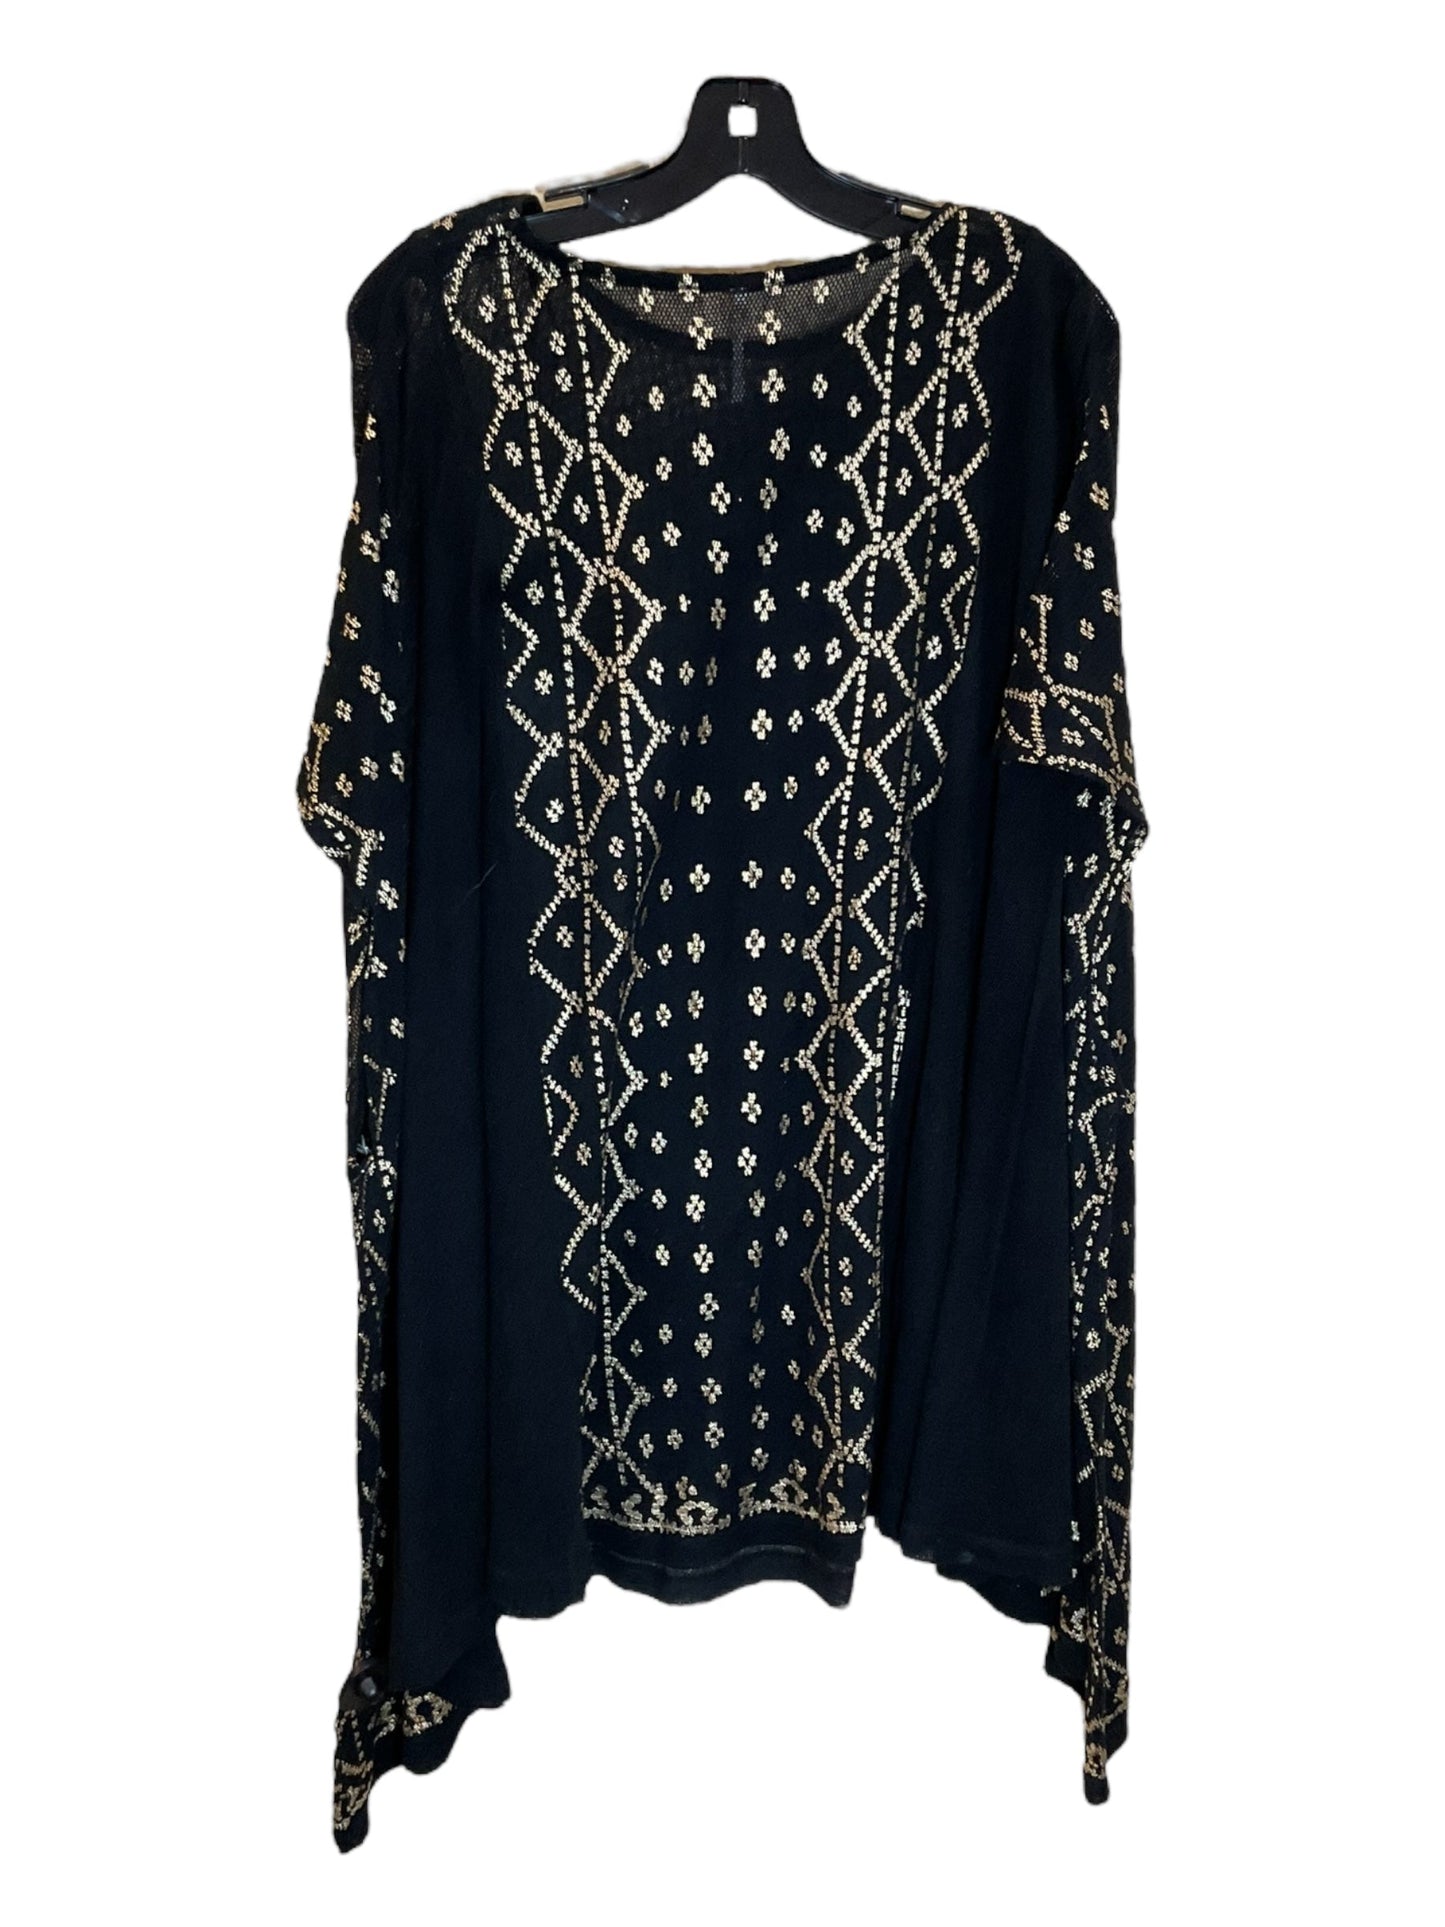 Black & Gold Tunic Long Sleeve Free People, Size S